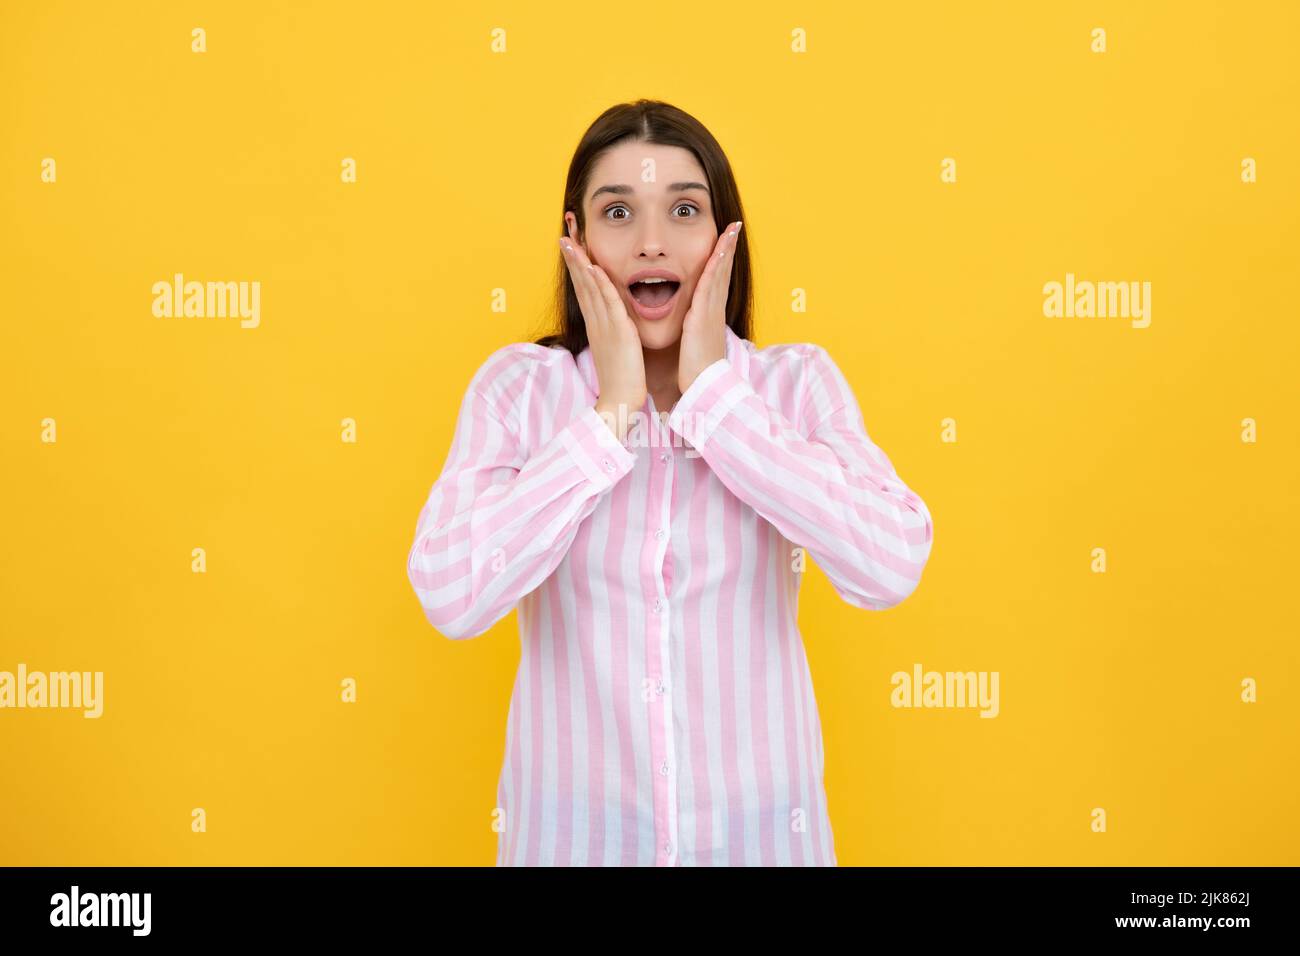 Surprised astonished young woman with open mouth. Portrait of excited amazed gasping girl. Expressive facial expressions. Excited female face. Stock Photo